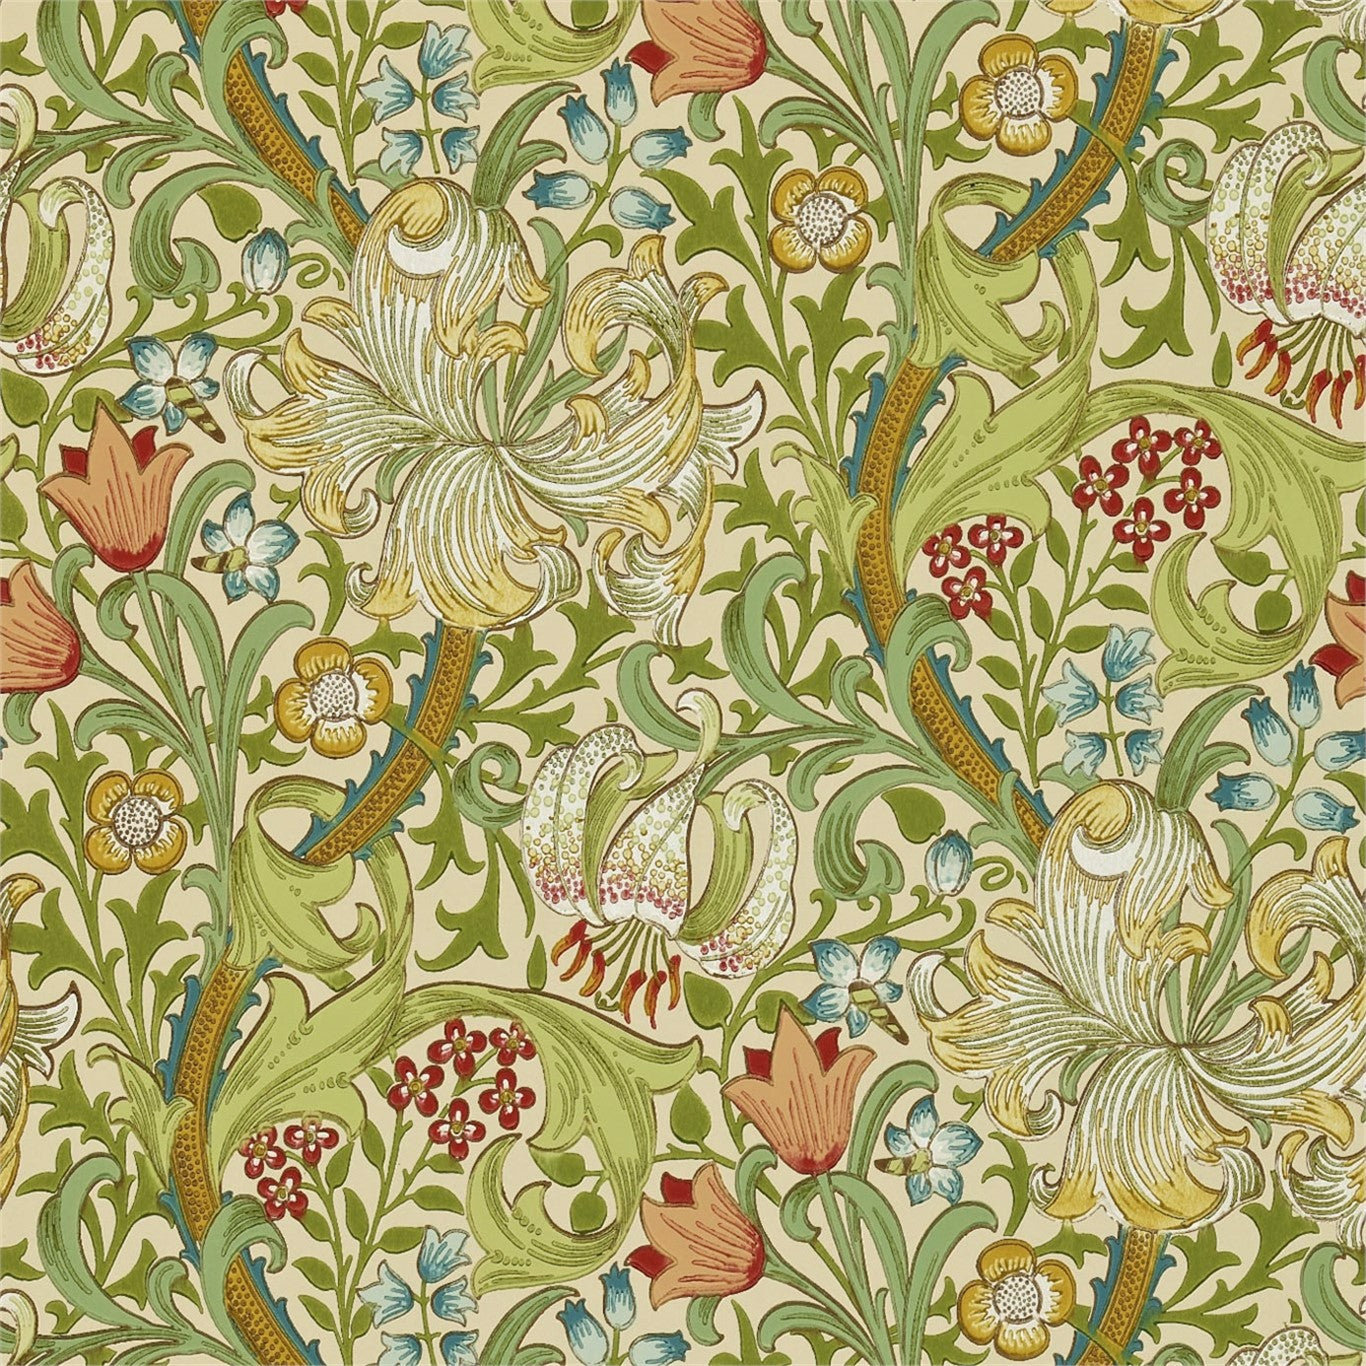 Golden Lily Pale Biscuit Wallpaper DMI1G3102 by Morris & Co